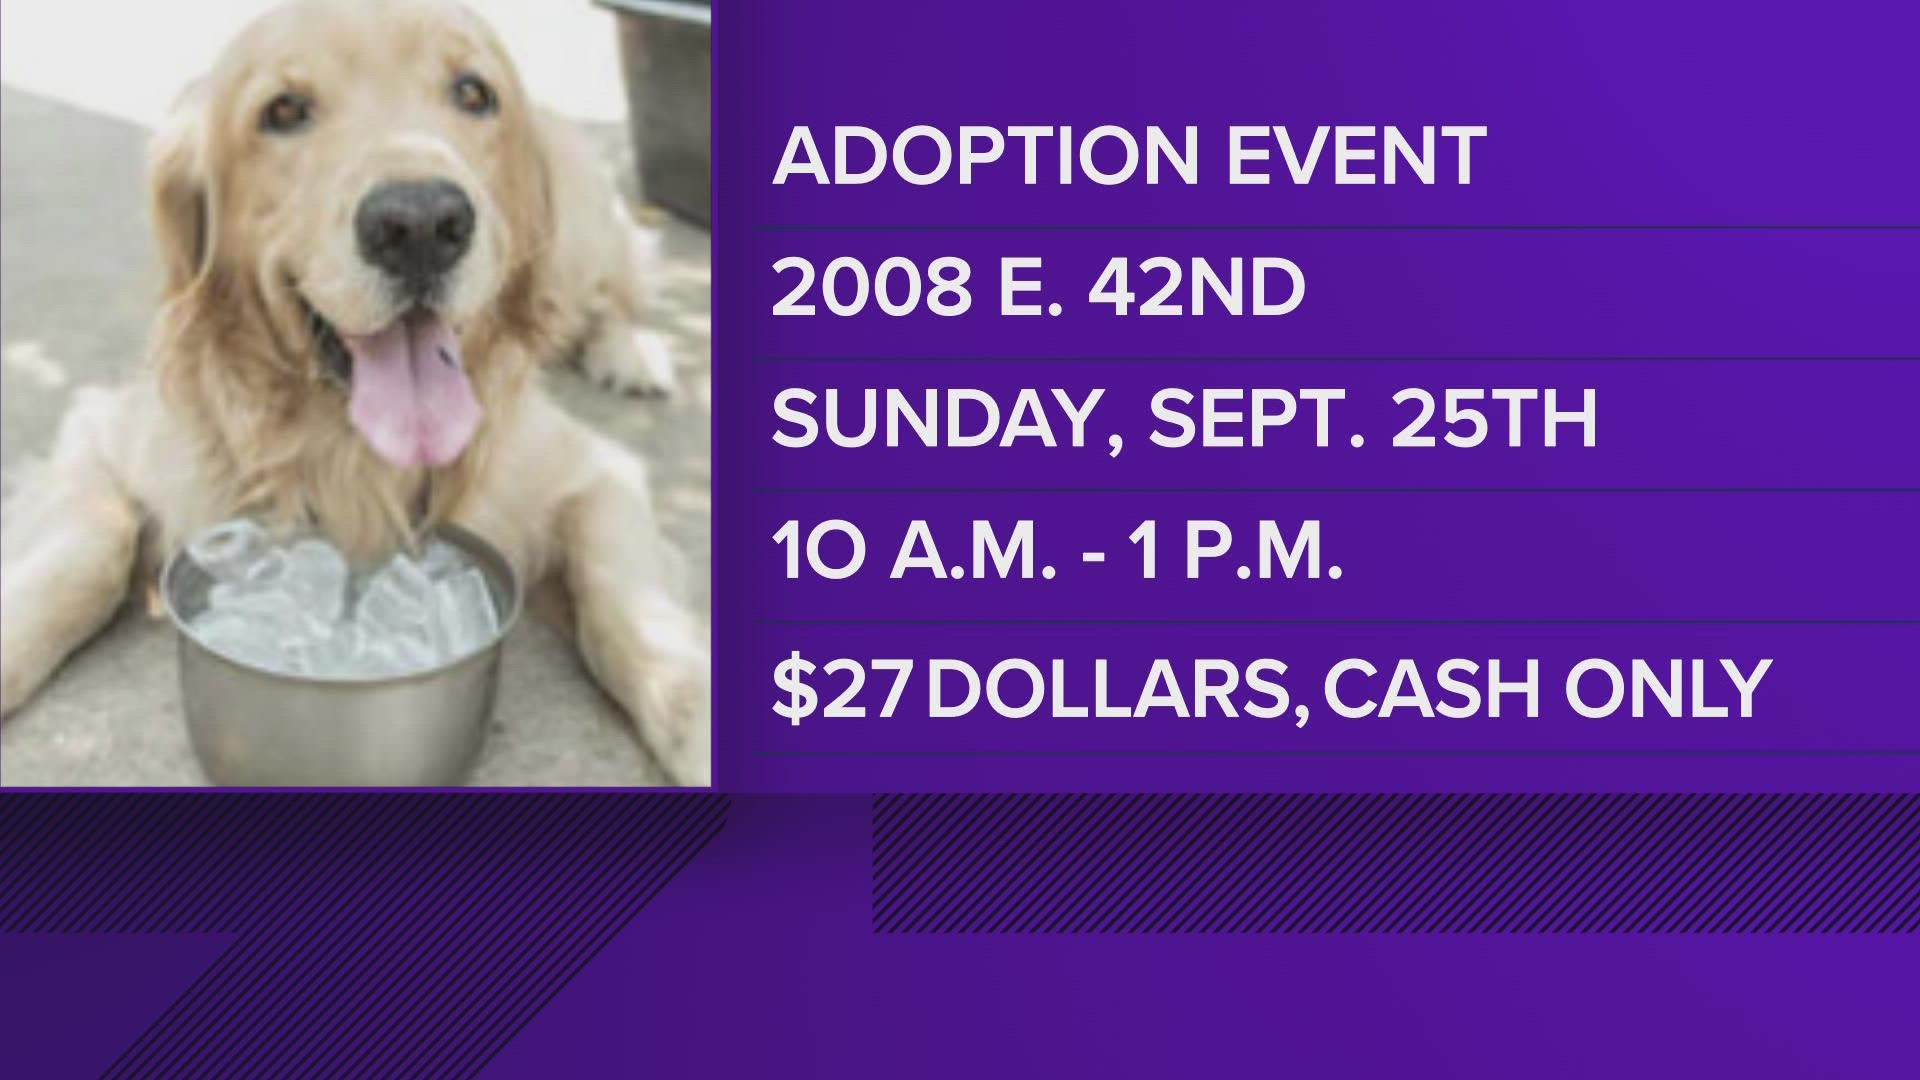 The Odessa Police Department and Animal Shelter will both have events from 10:00 a.m. to 1:00 p.m.